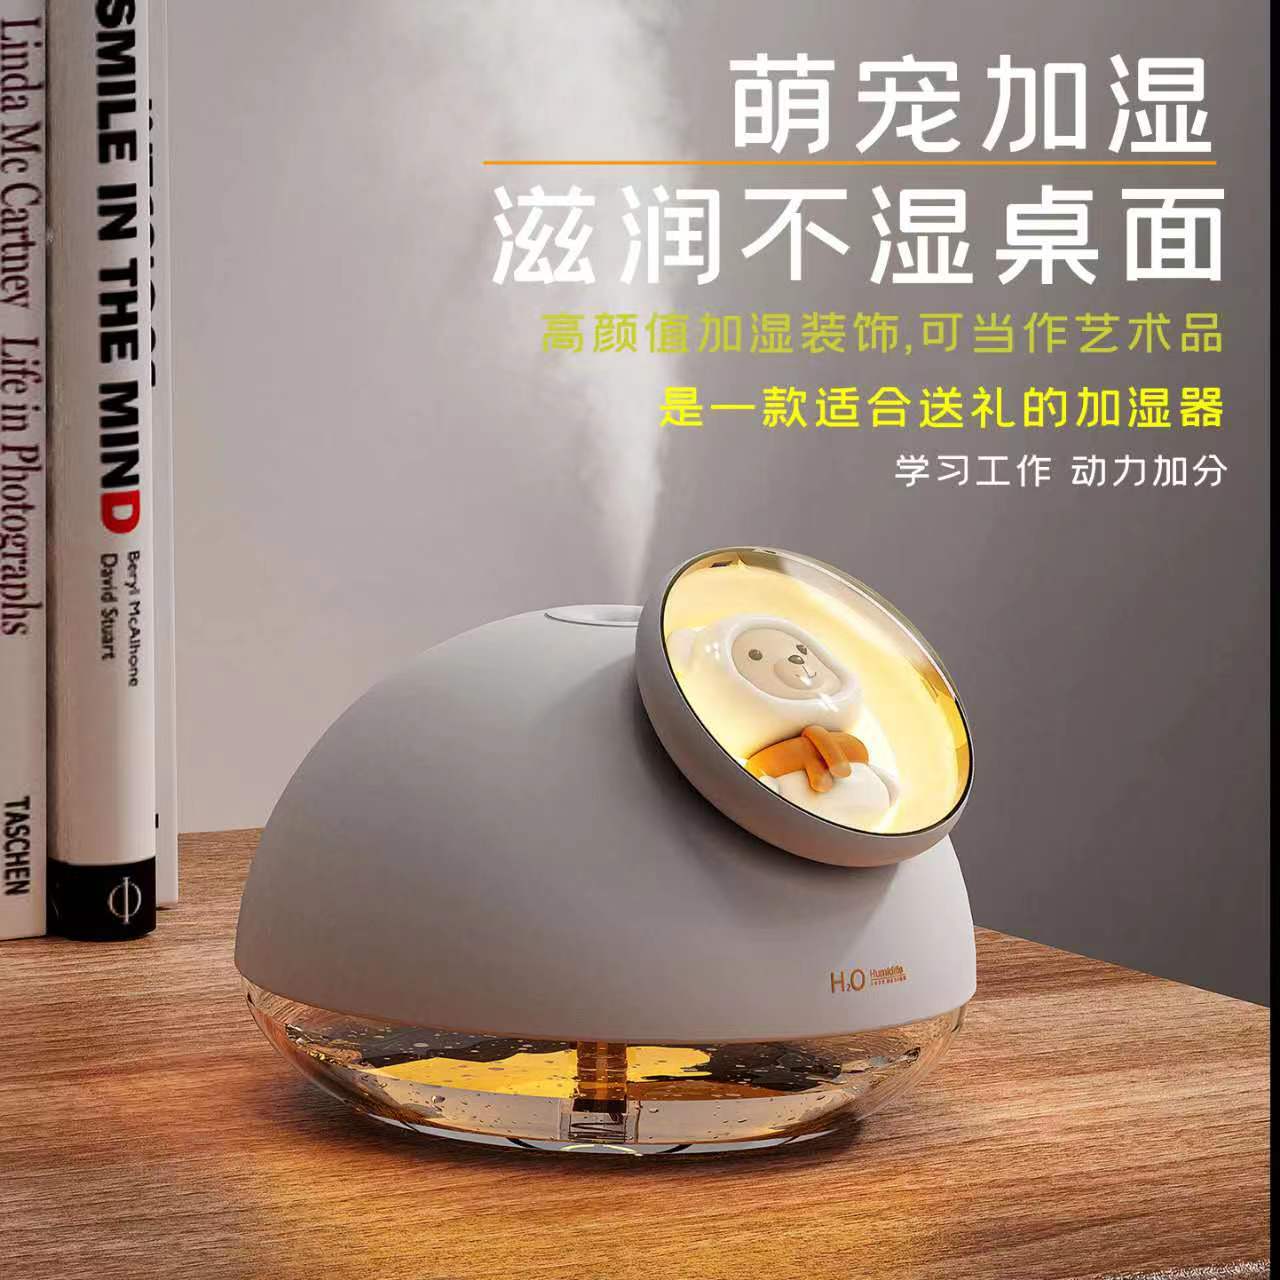 2023 New Seven-Color Ambience Light Cute Pet Usb Humidifier Household Office Desk Surface Panel Humidifier Small Wholesale